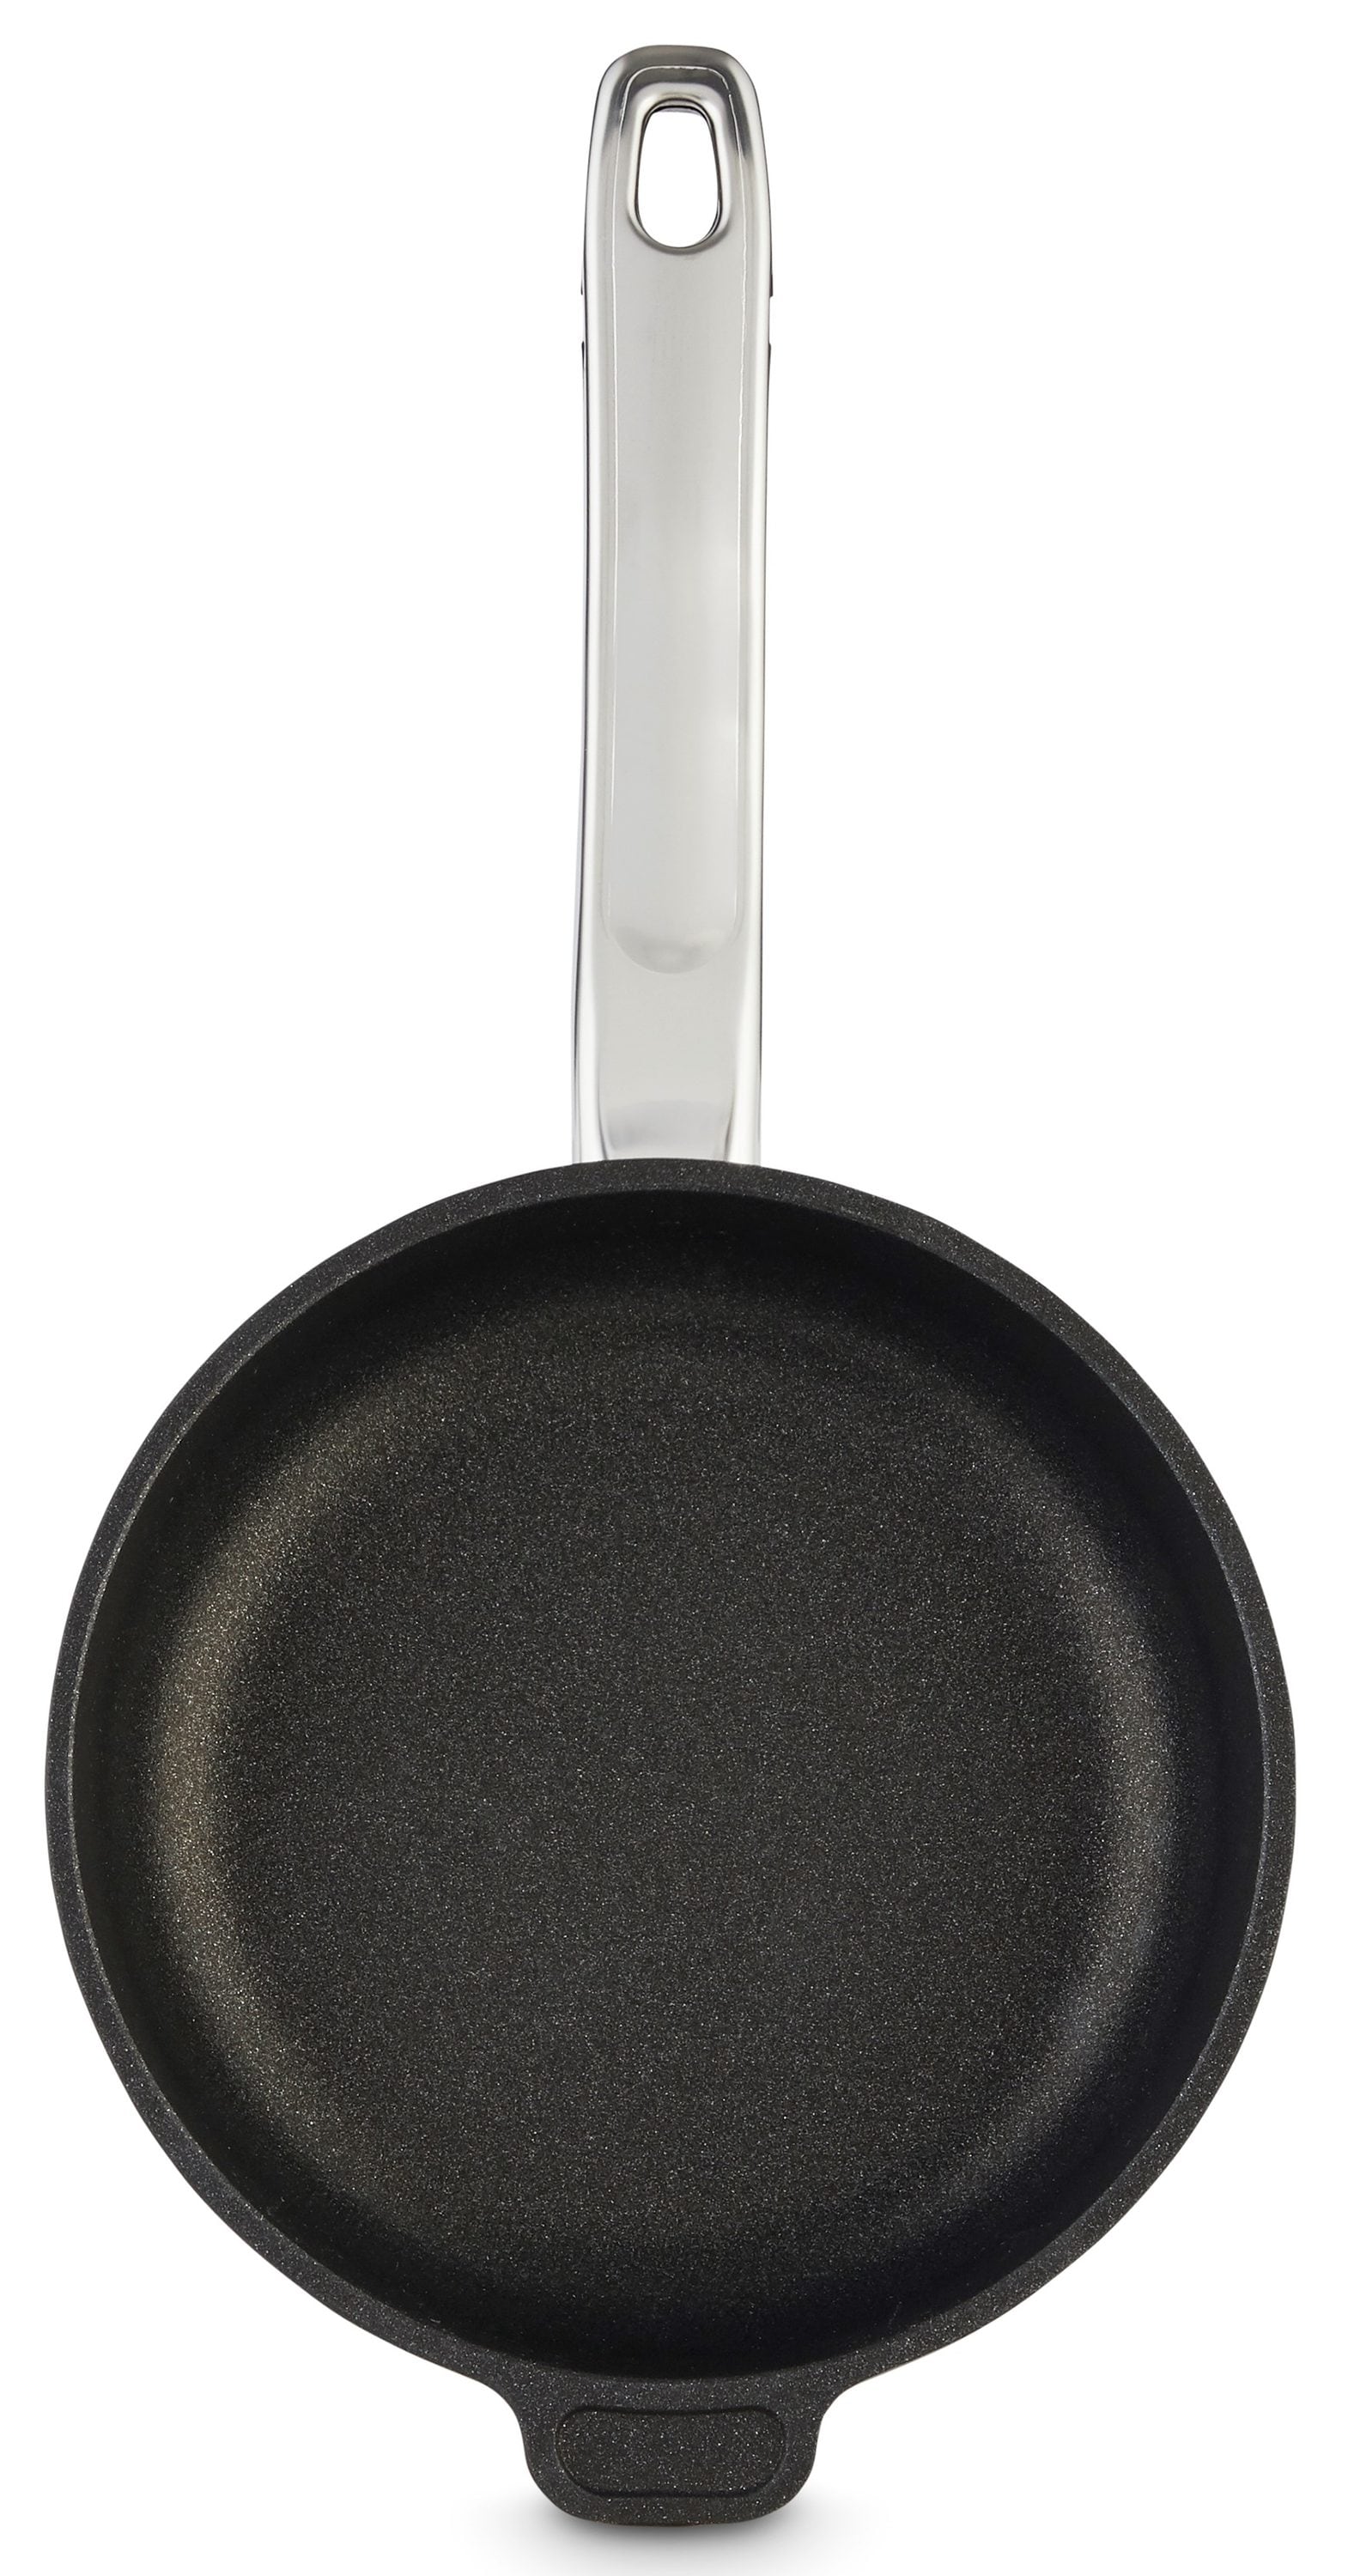 Ozeri Professional Series 8 Hand Cast Ceramic Earth Fry Pan, Made in Germany